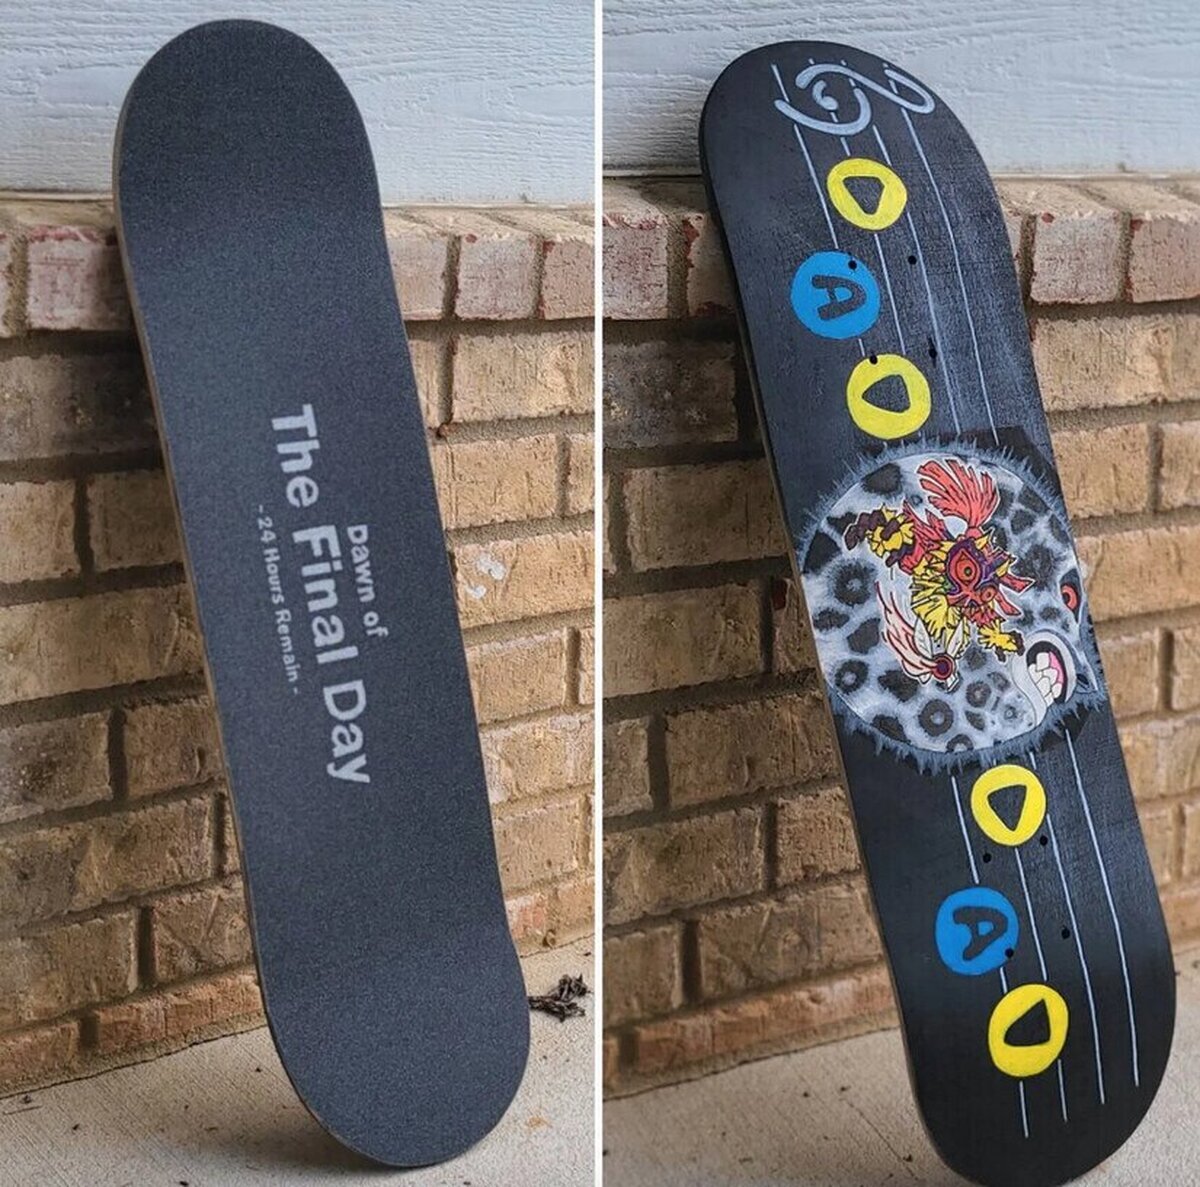 The Skateboard of Time 